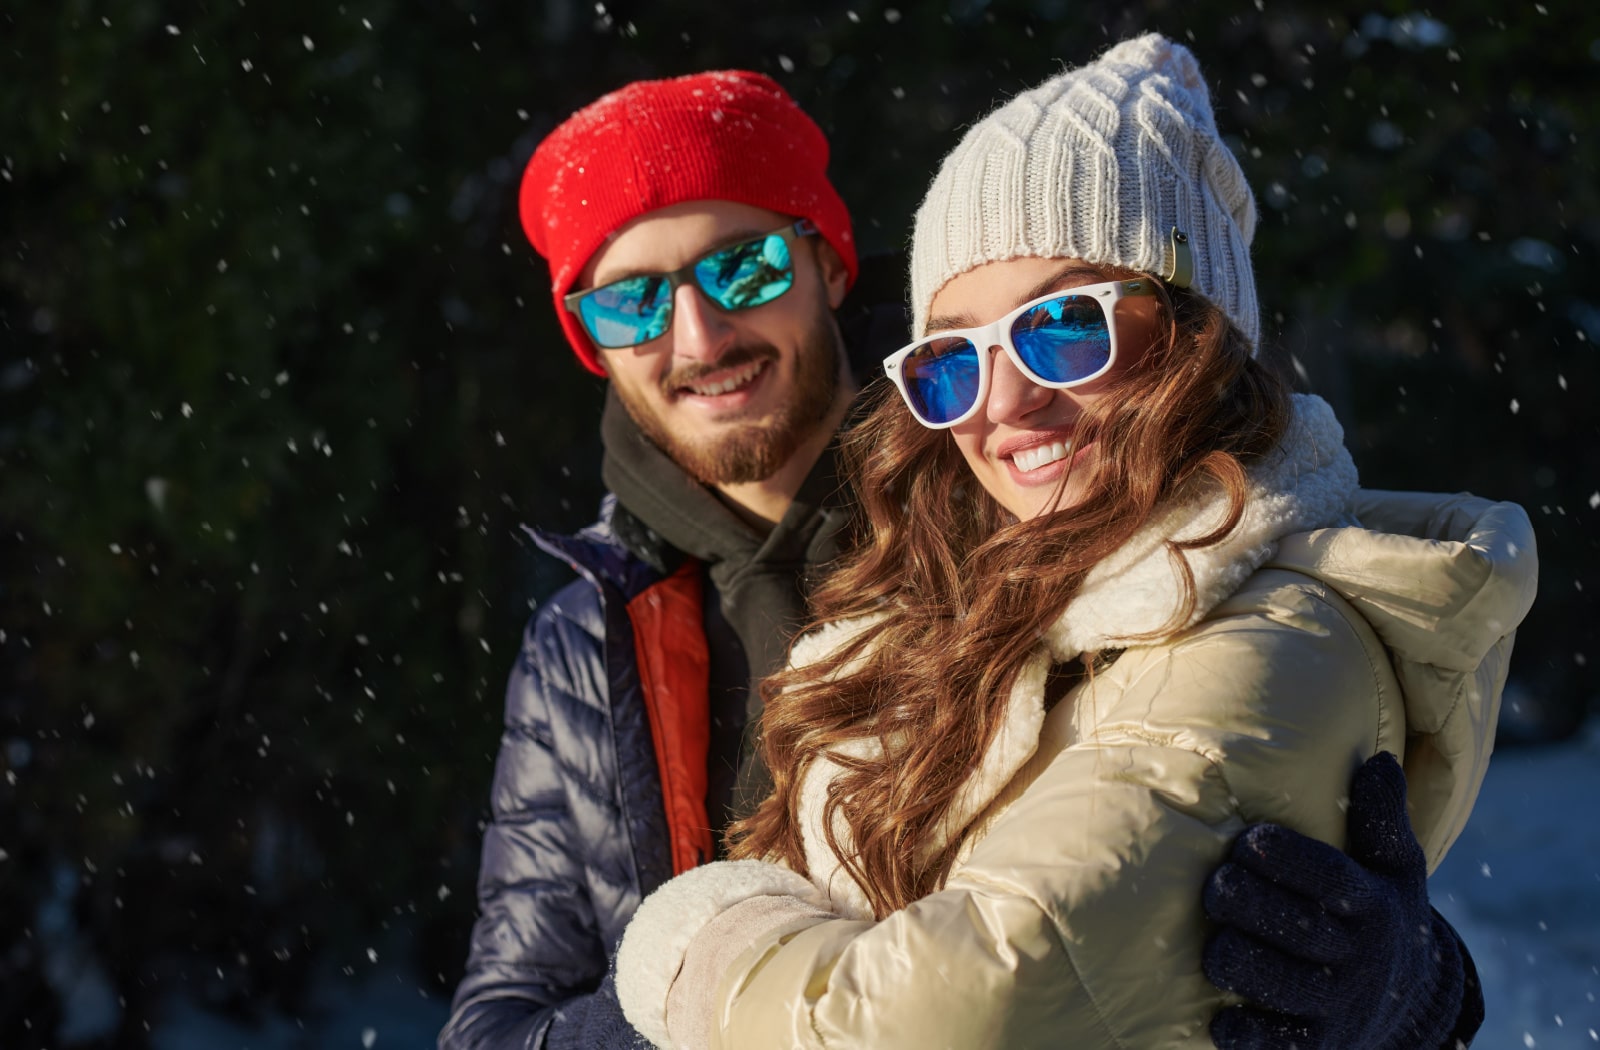 A couple standing together outside in the snow, wearing winter jackets, hats, and sunglasses